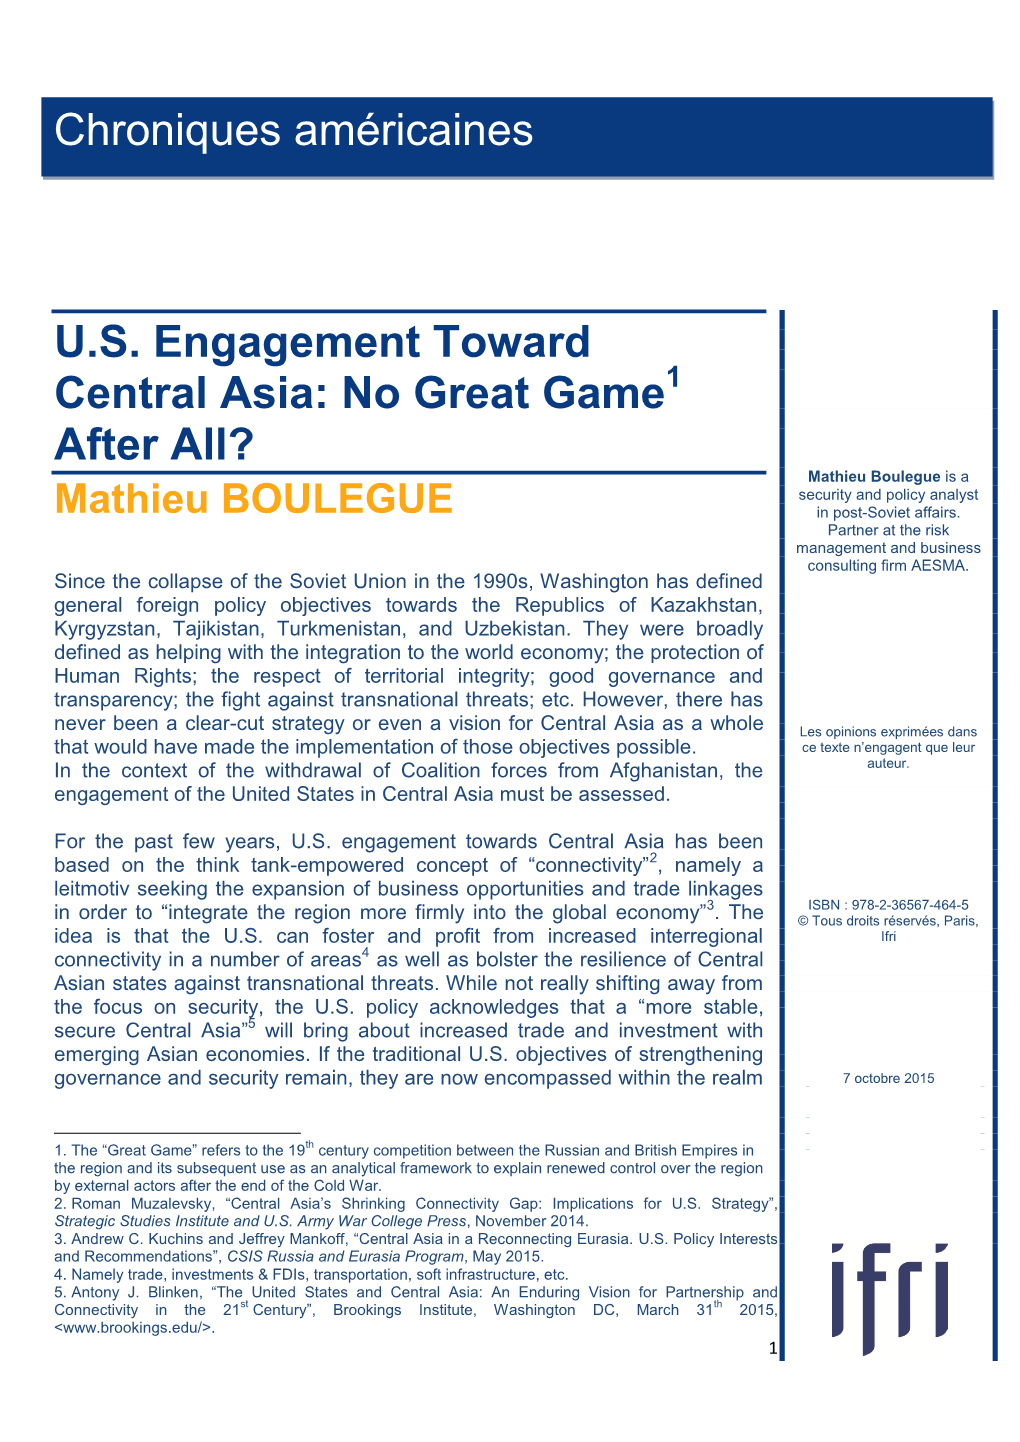 U.S. Engagement Toward Central Asia: No Great Game After All